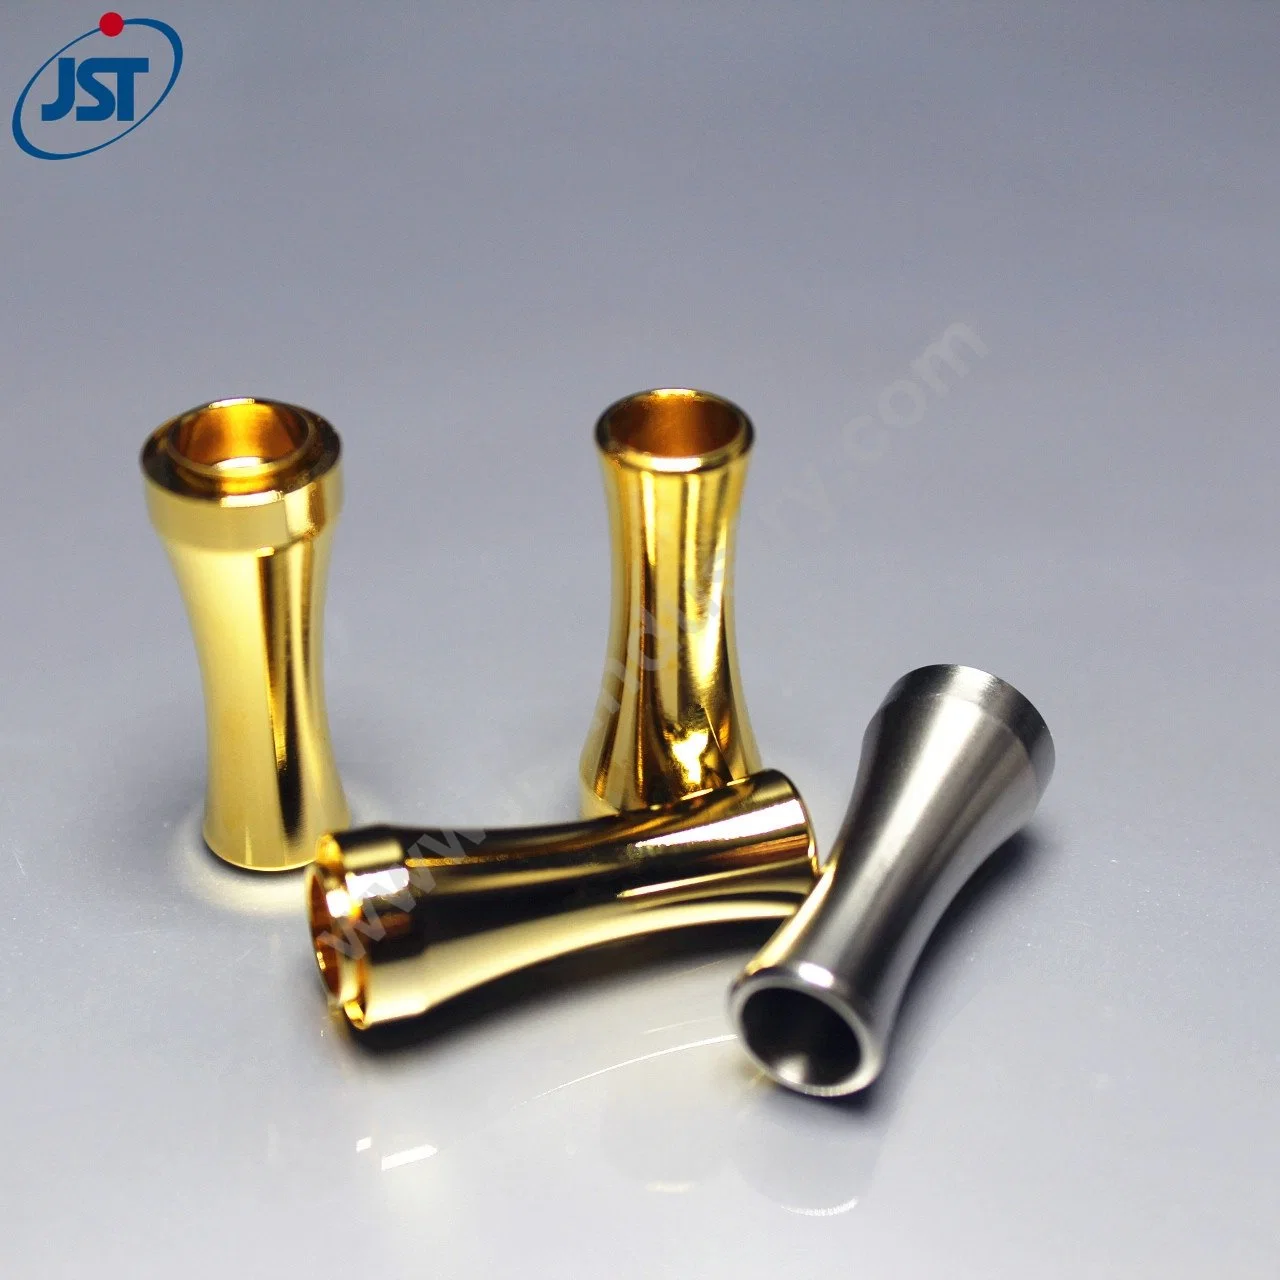 Precision Custom CNC Turned Stainless Steel E-Cigarette Tip with Gold Plating